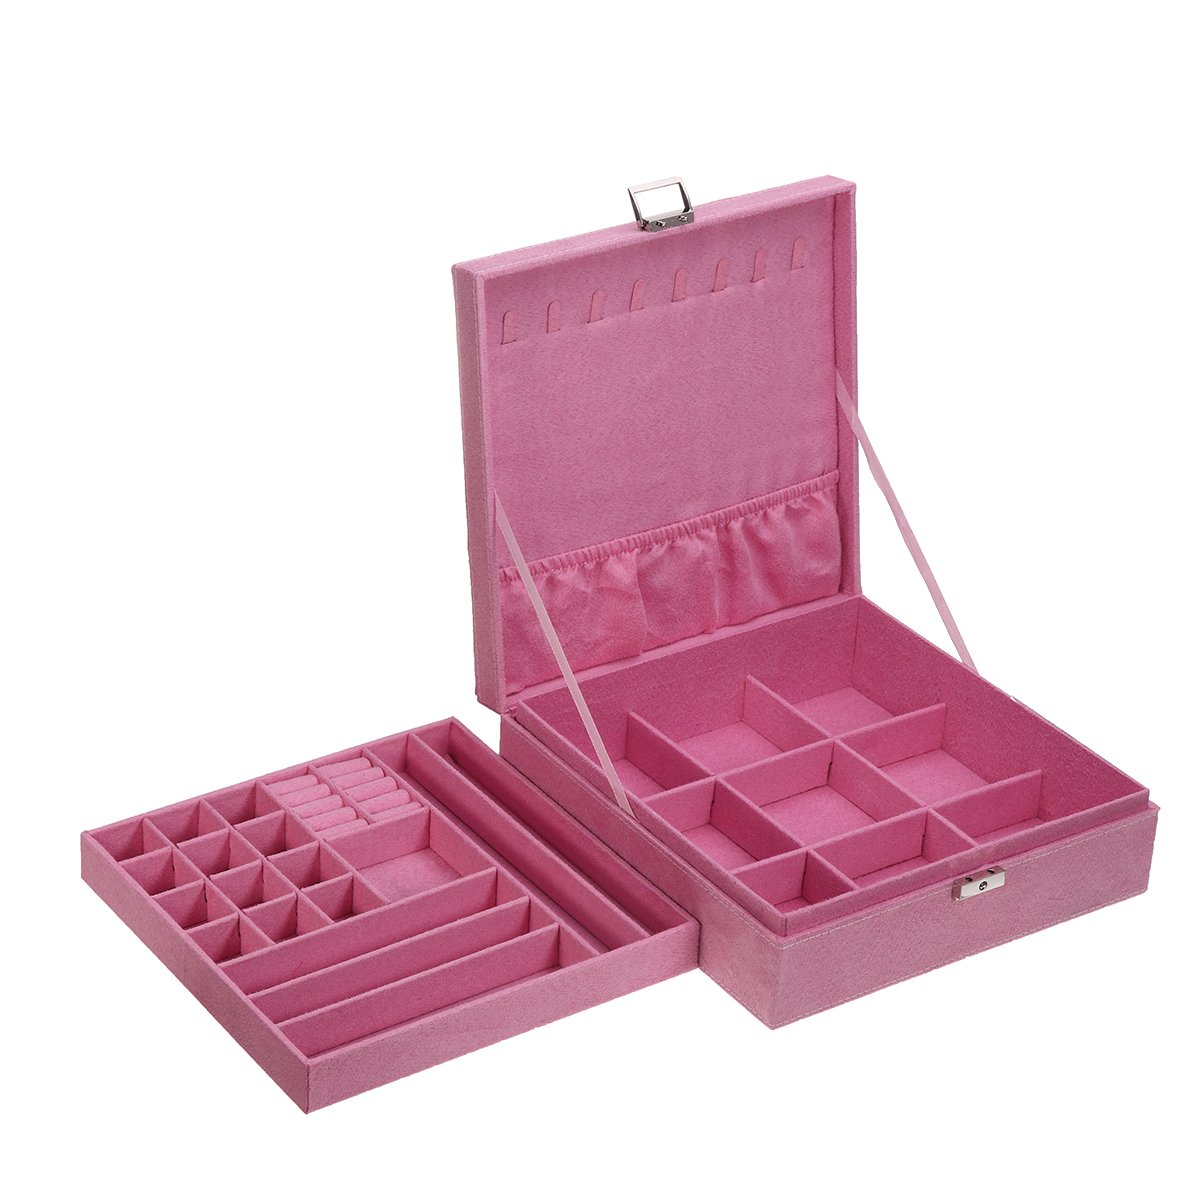 Multi-function-Vintage-Jewelry-Box-Organizers-Two-layer-Lockable-Jewelry-Display-Storage-Case-1855370-18